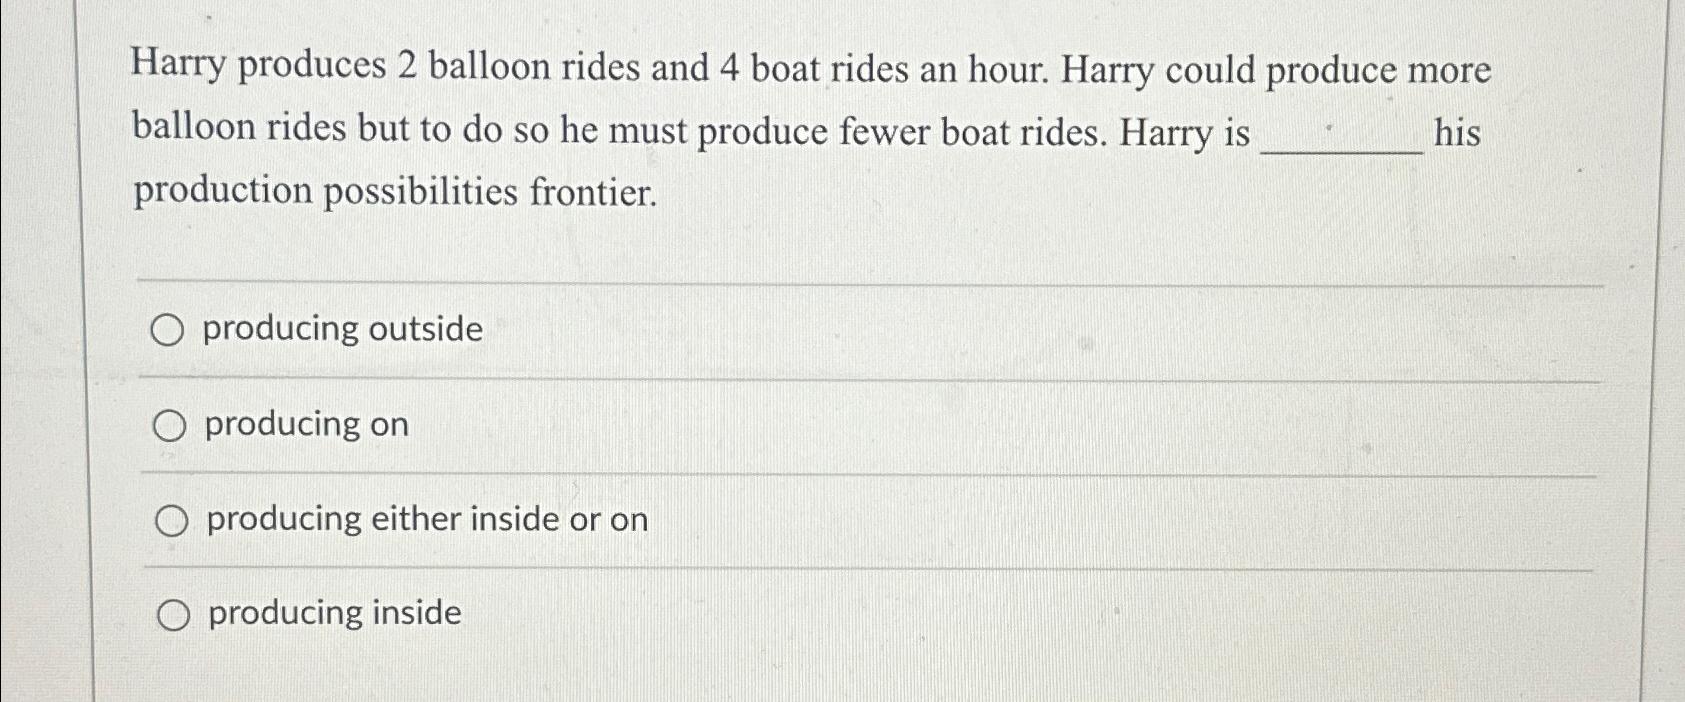 Harry produces 2 balloon rides and 4 boat rides an hour. Harry could produce more balloon rides but to do so